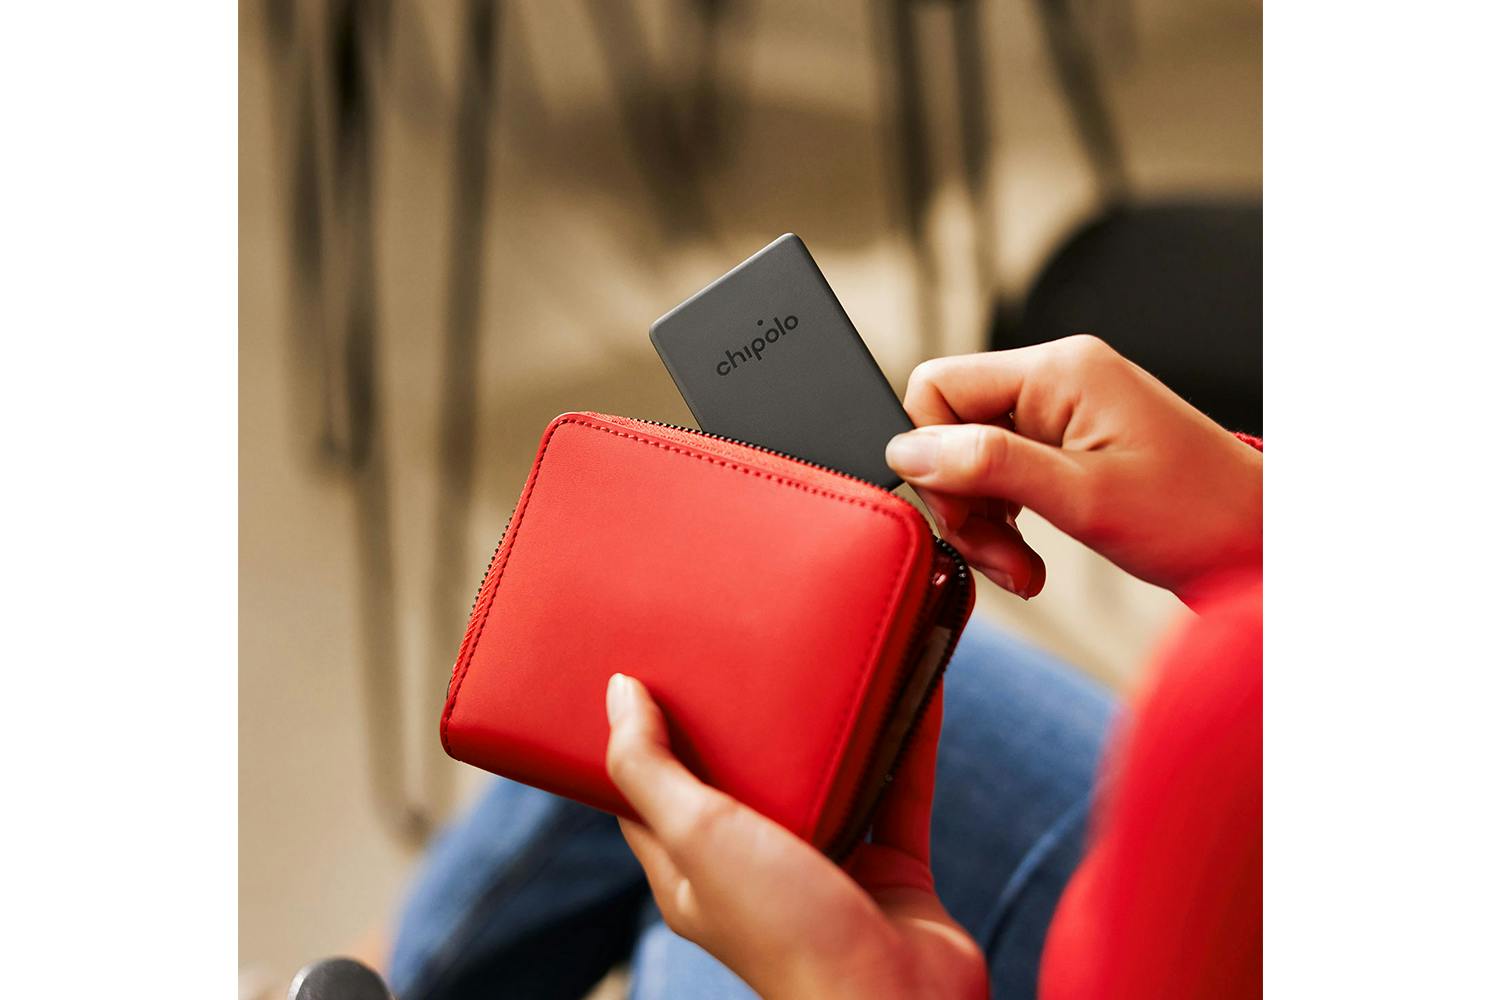 Chipolo's Card Spot is an AirTag for your wallet